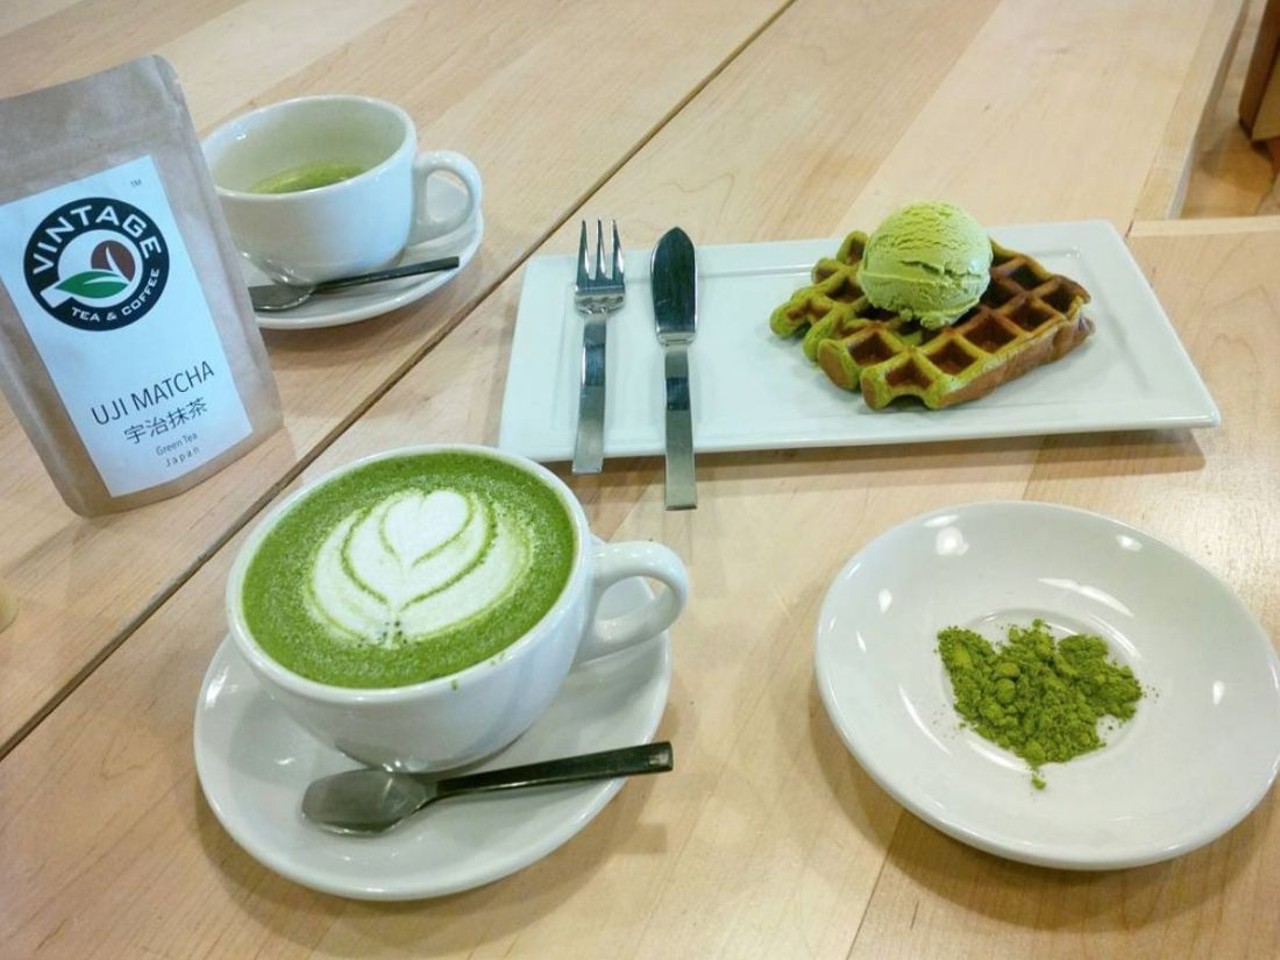  Vintage Tea and Coffee
1816 E. 12th St., 216-417-8230
Located at Playhouse Square, this tea and coffee shop is a great sit down place for a quiet afternoon in the company of a matcha tea latte, and other green things.
Photo via clevelandscene/Instagram